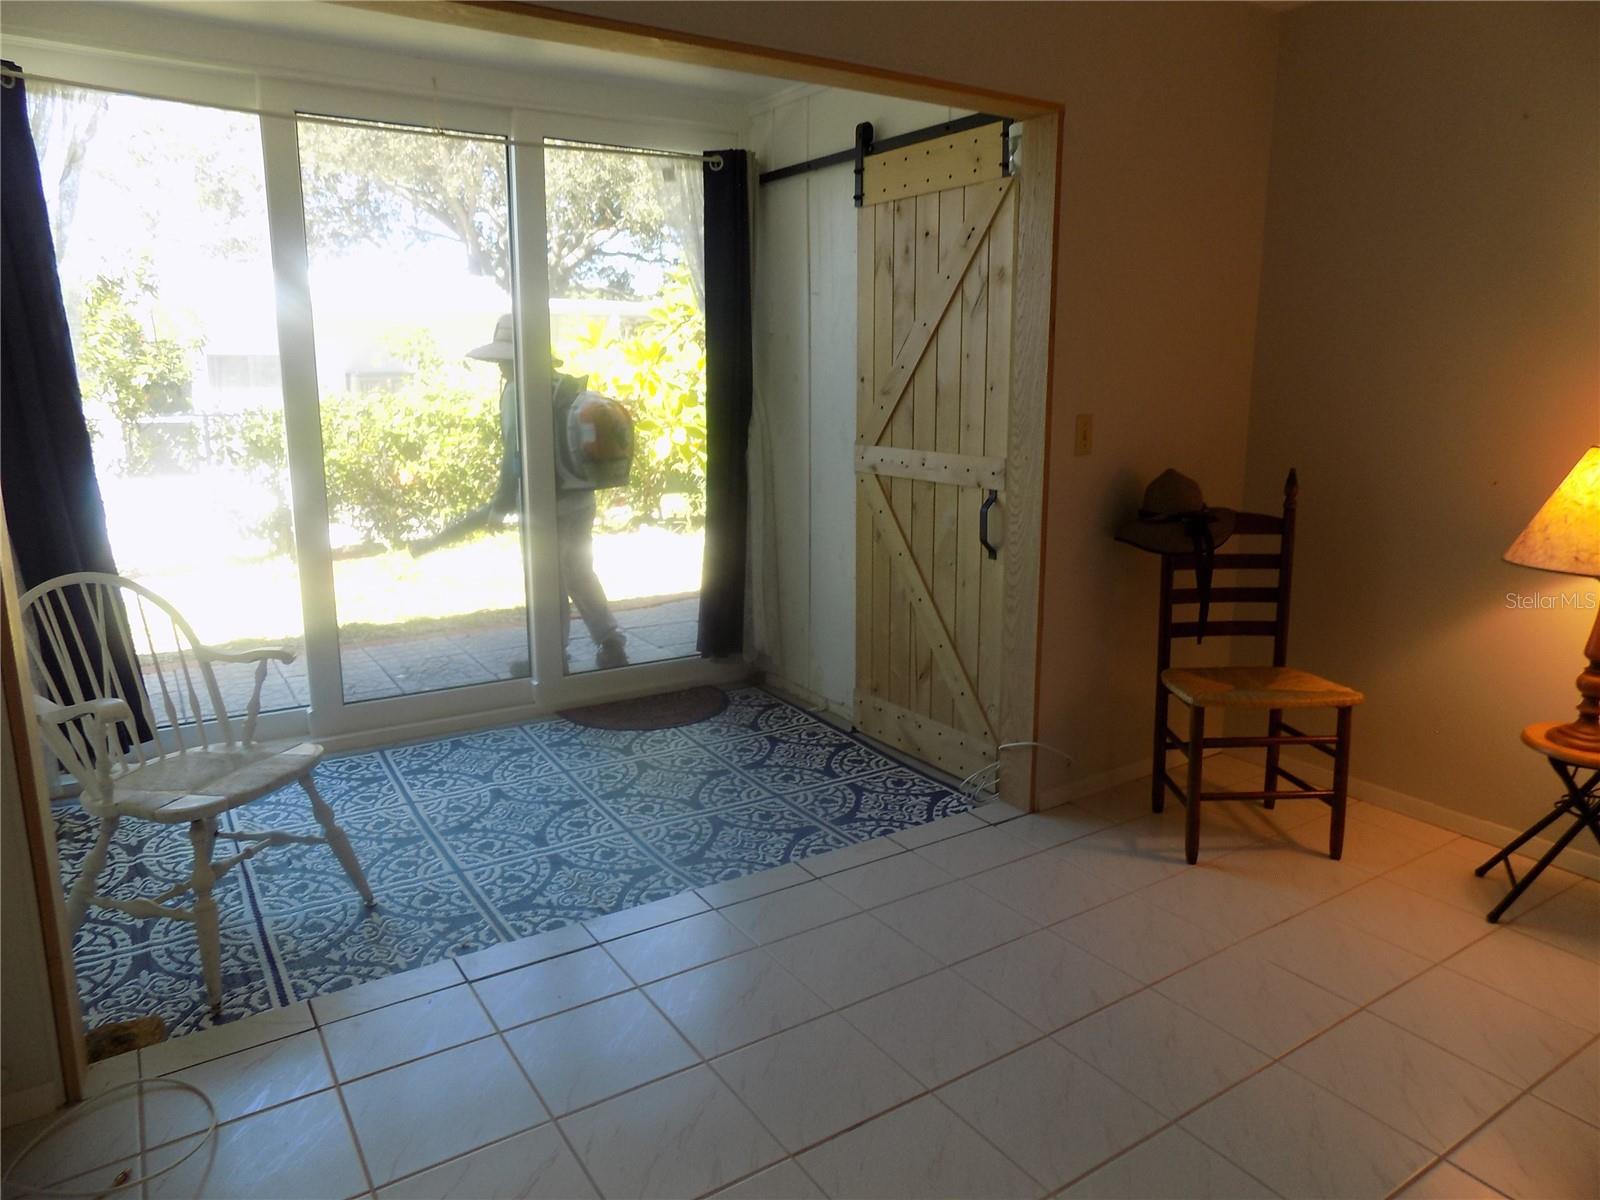 Enclosed Sunroom Porch - and Laundry Closet.  New Storm rated Sliding doors to Patio area.